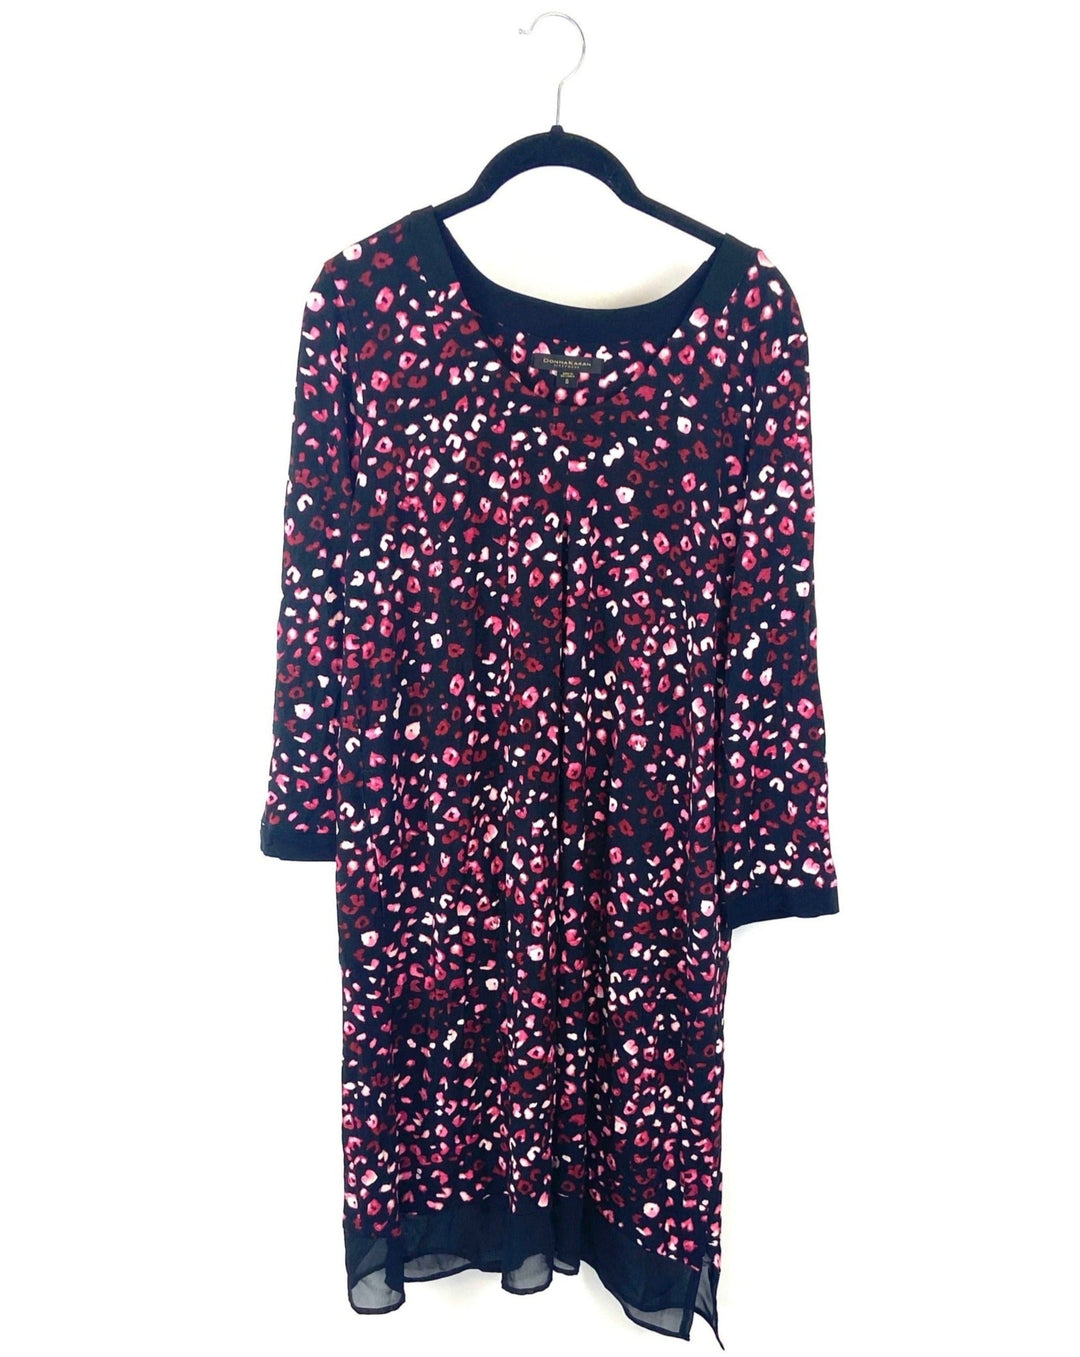 Black and Red Printed Nightgown - Small